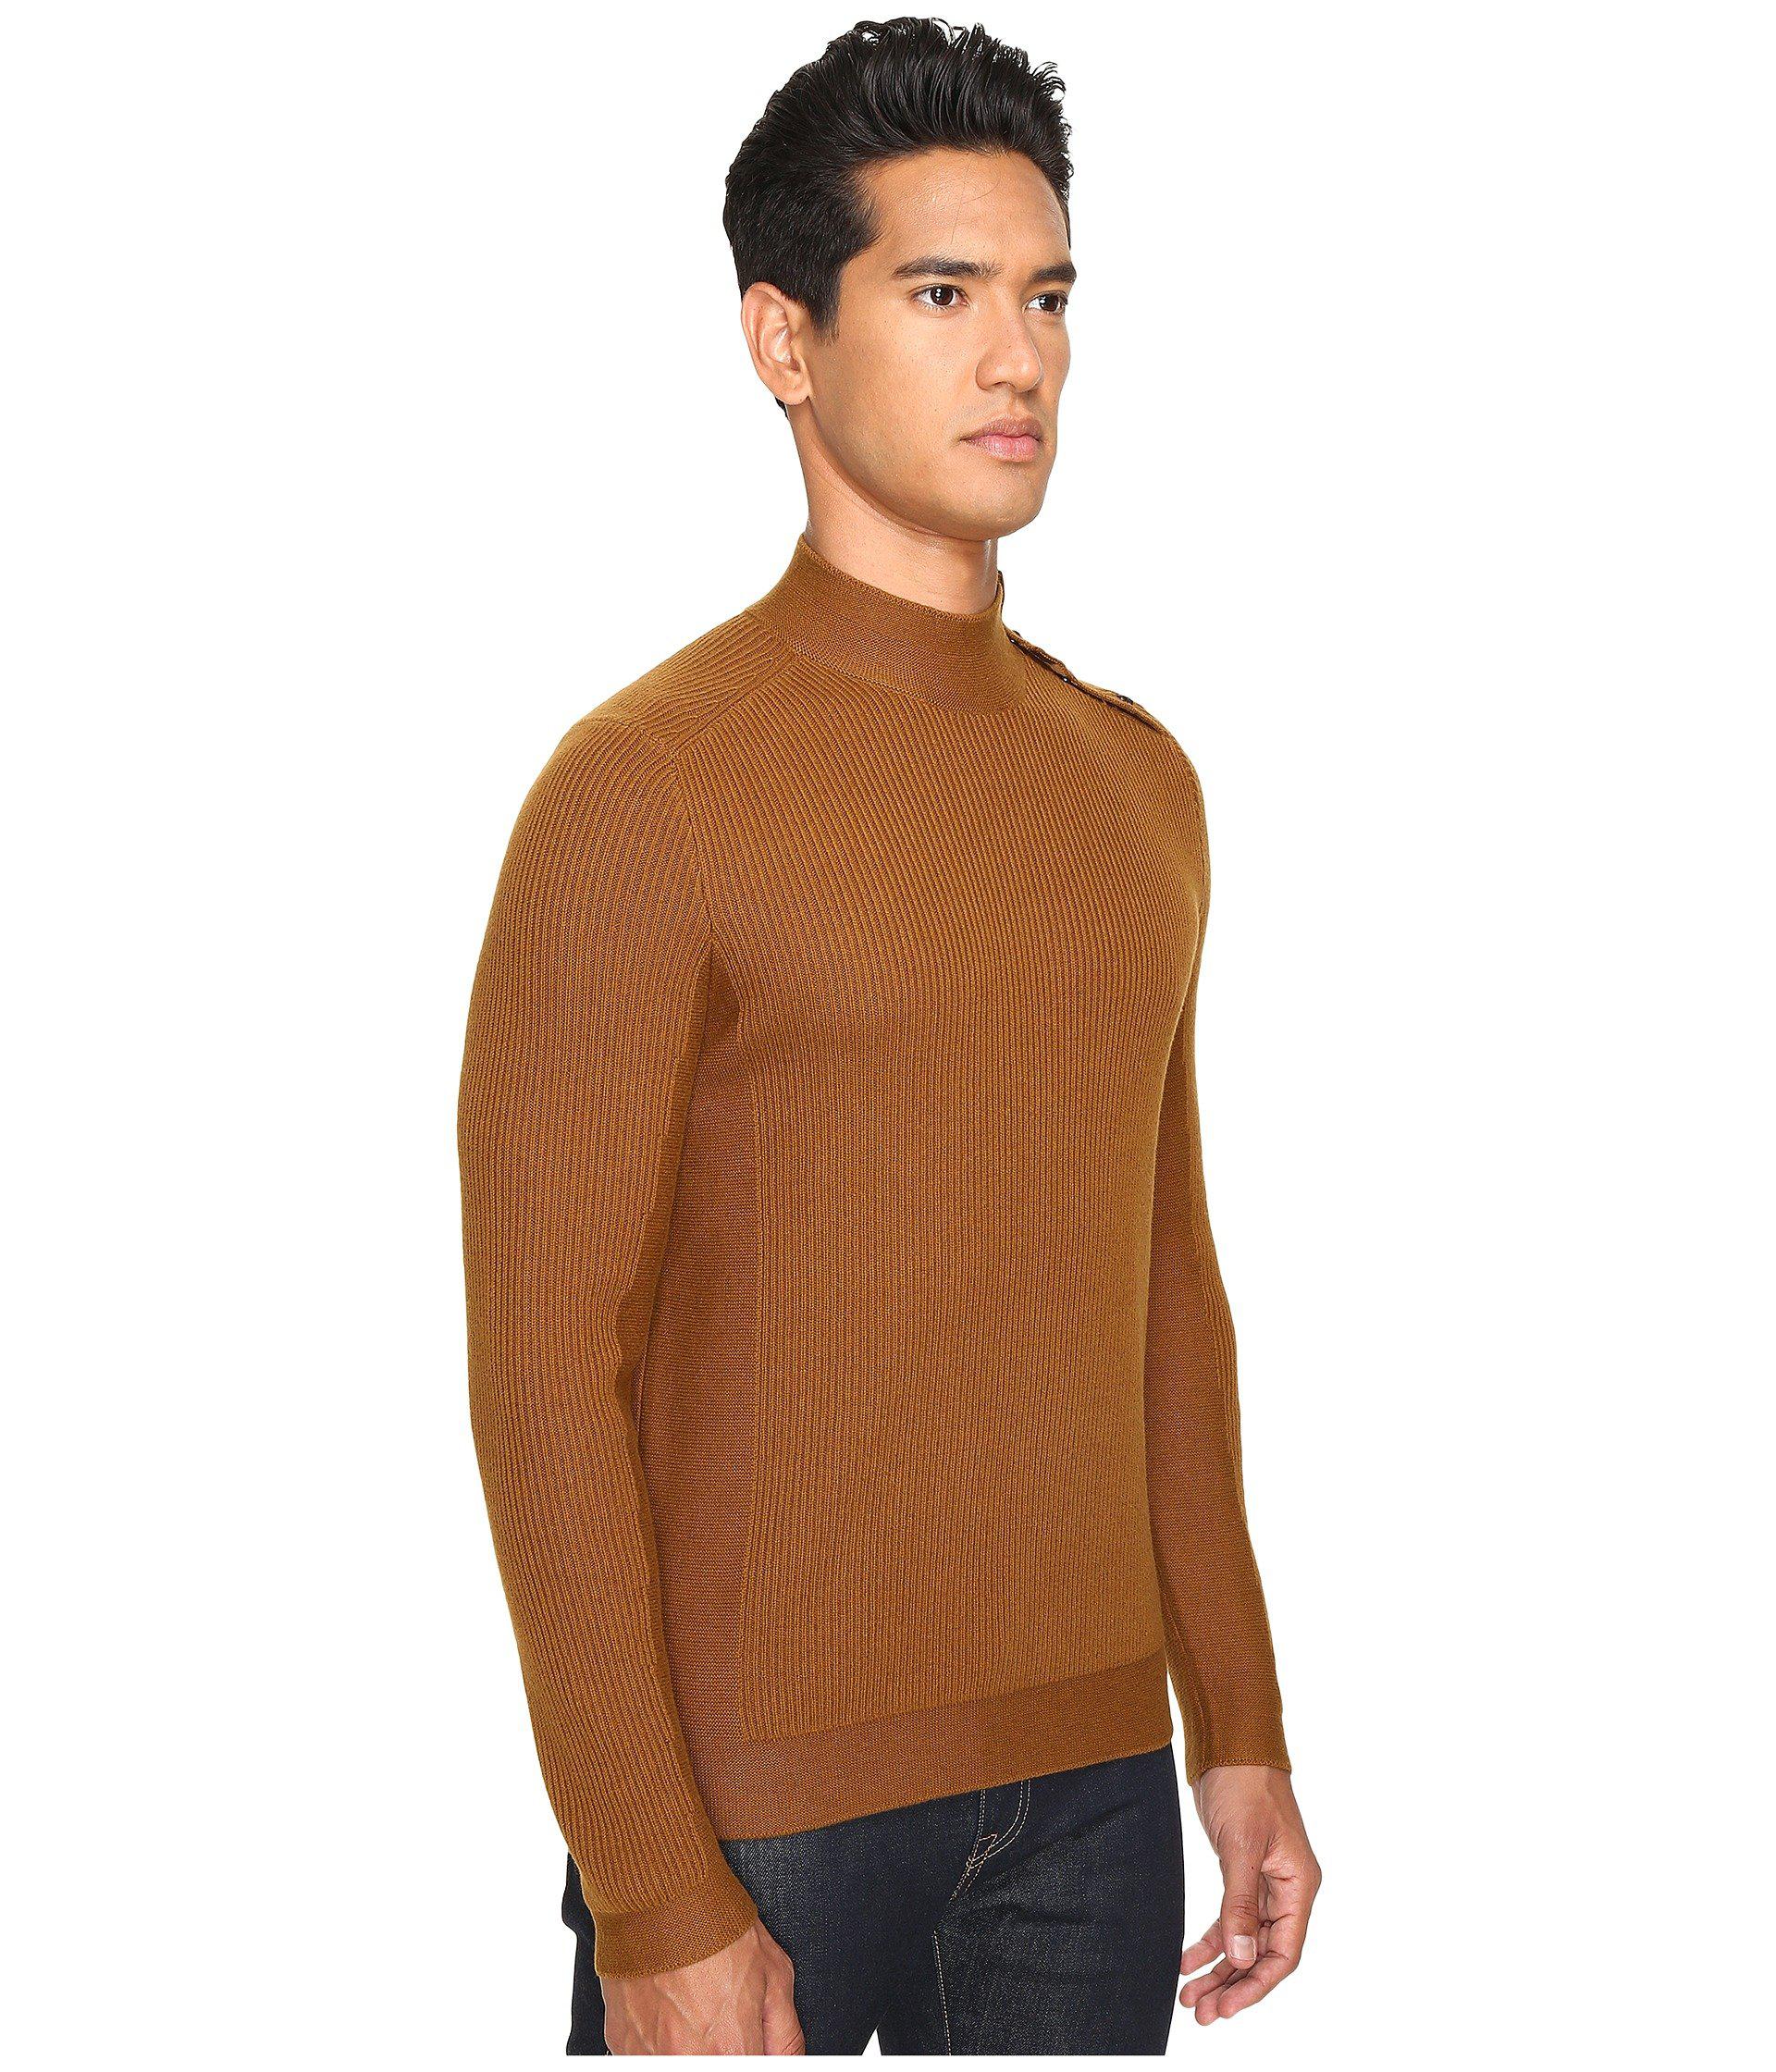 Download Lyst - The Kooples Cotton And Nylon Mock Turtleneck in Brown for Men